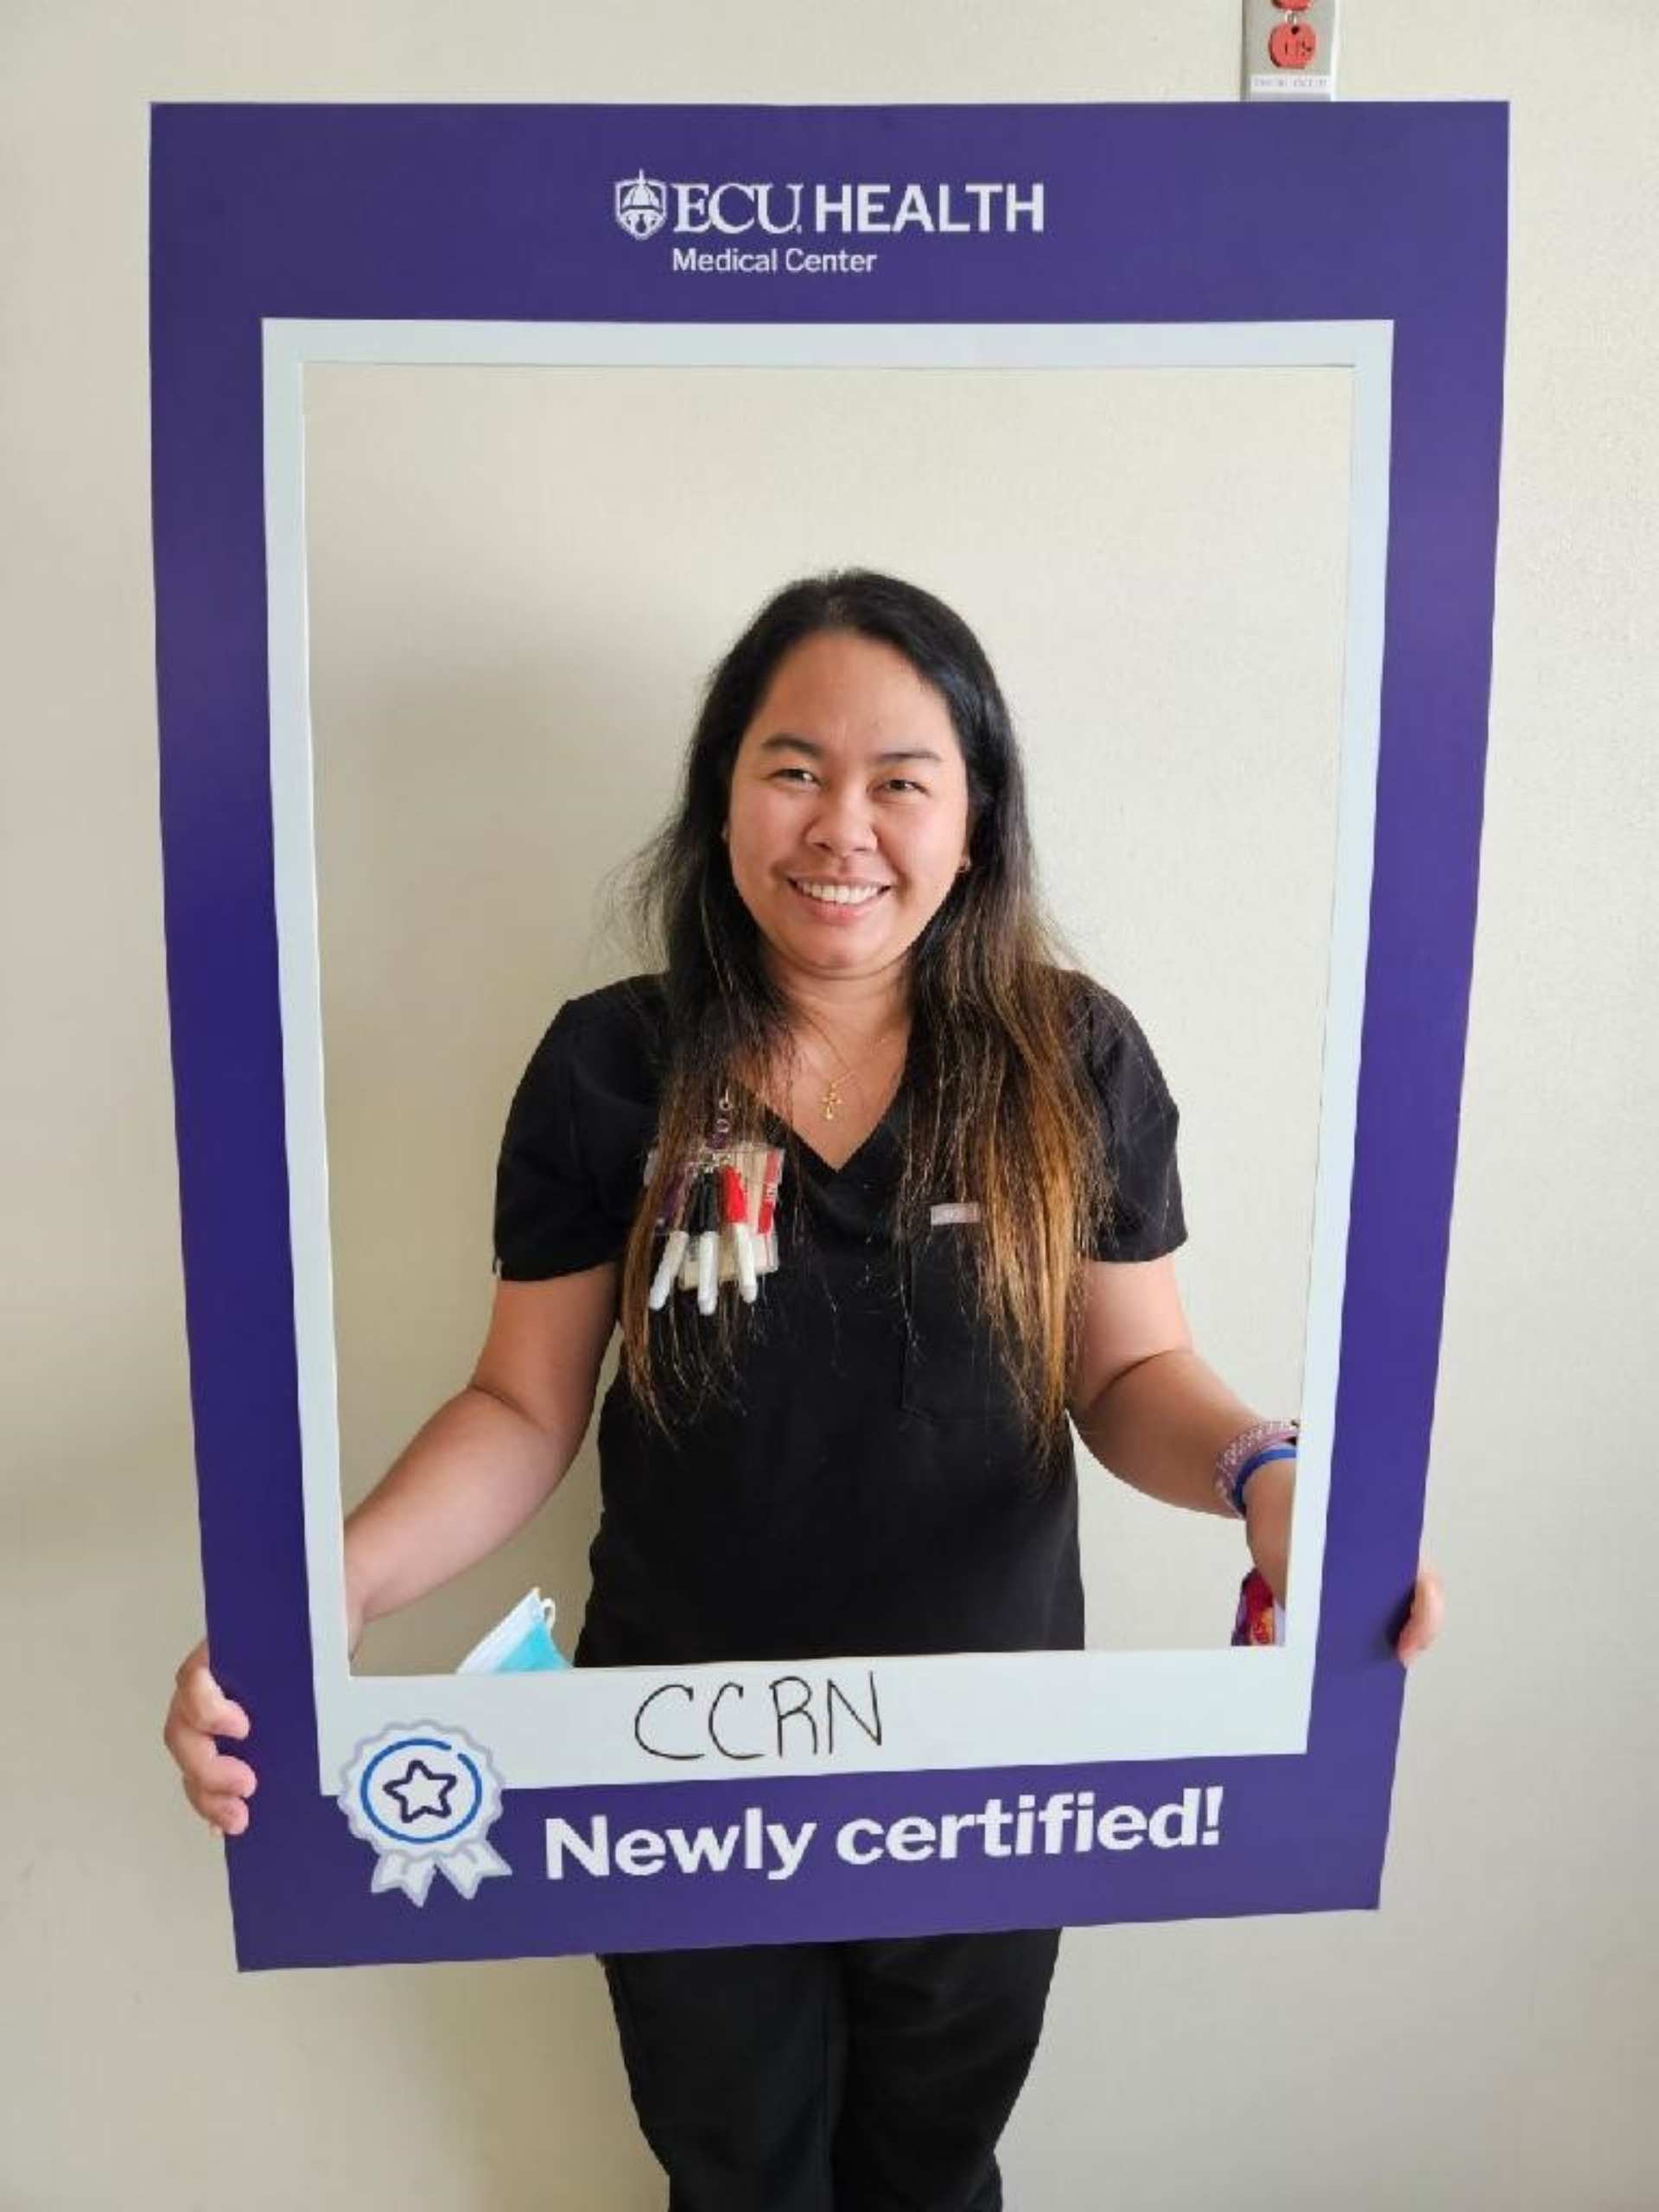 Lorraine Dela Pena works on NSICU and she received her Critical Care Registered Nurse certification